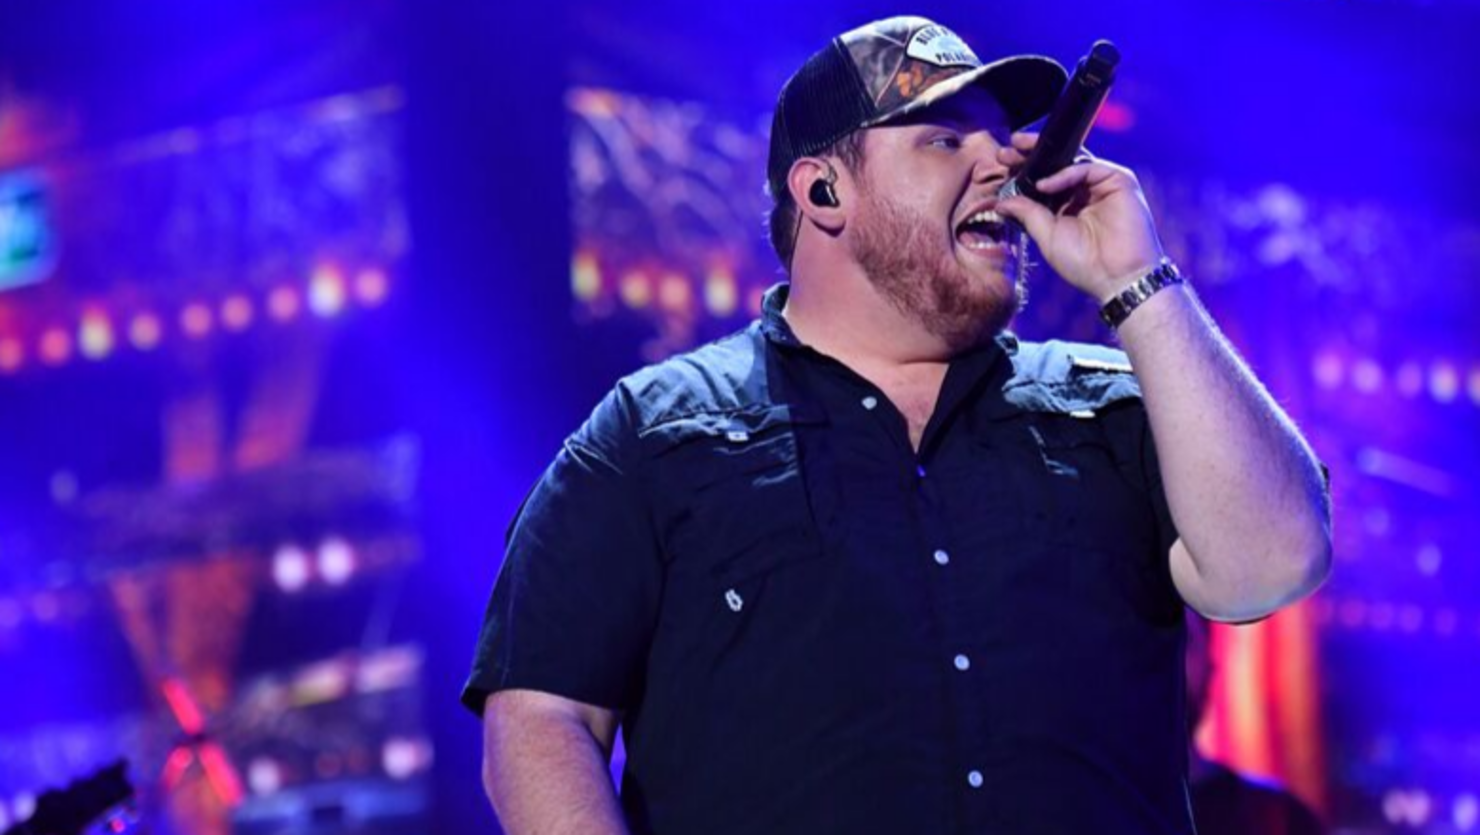 Luke Combs Announces Headlining 'What You See Is What You Get Tour' In 2020